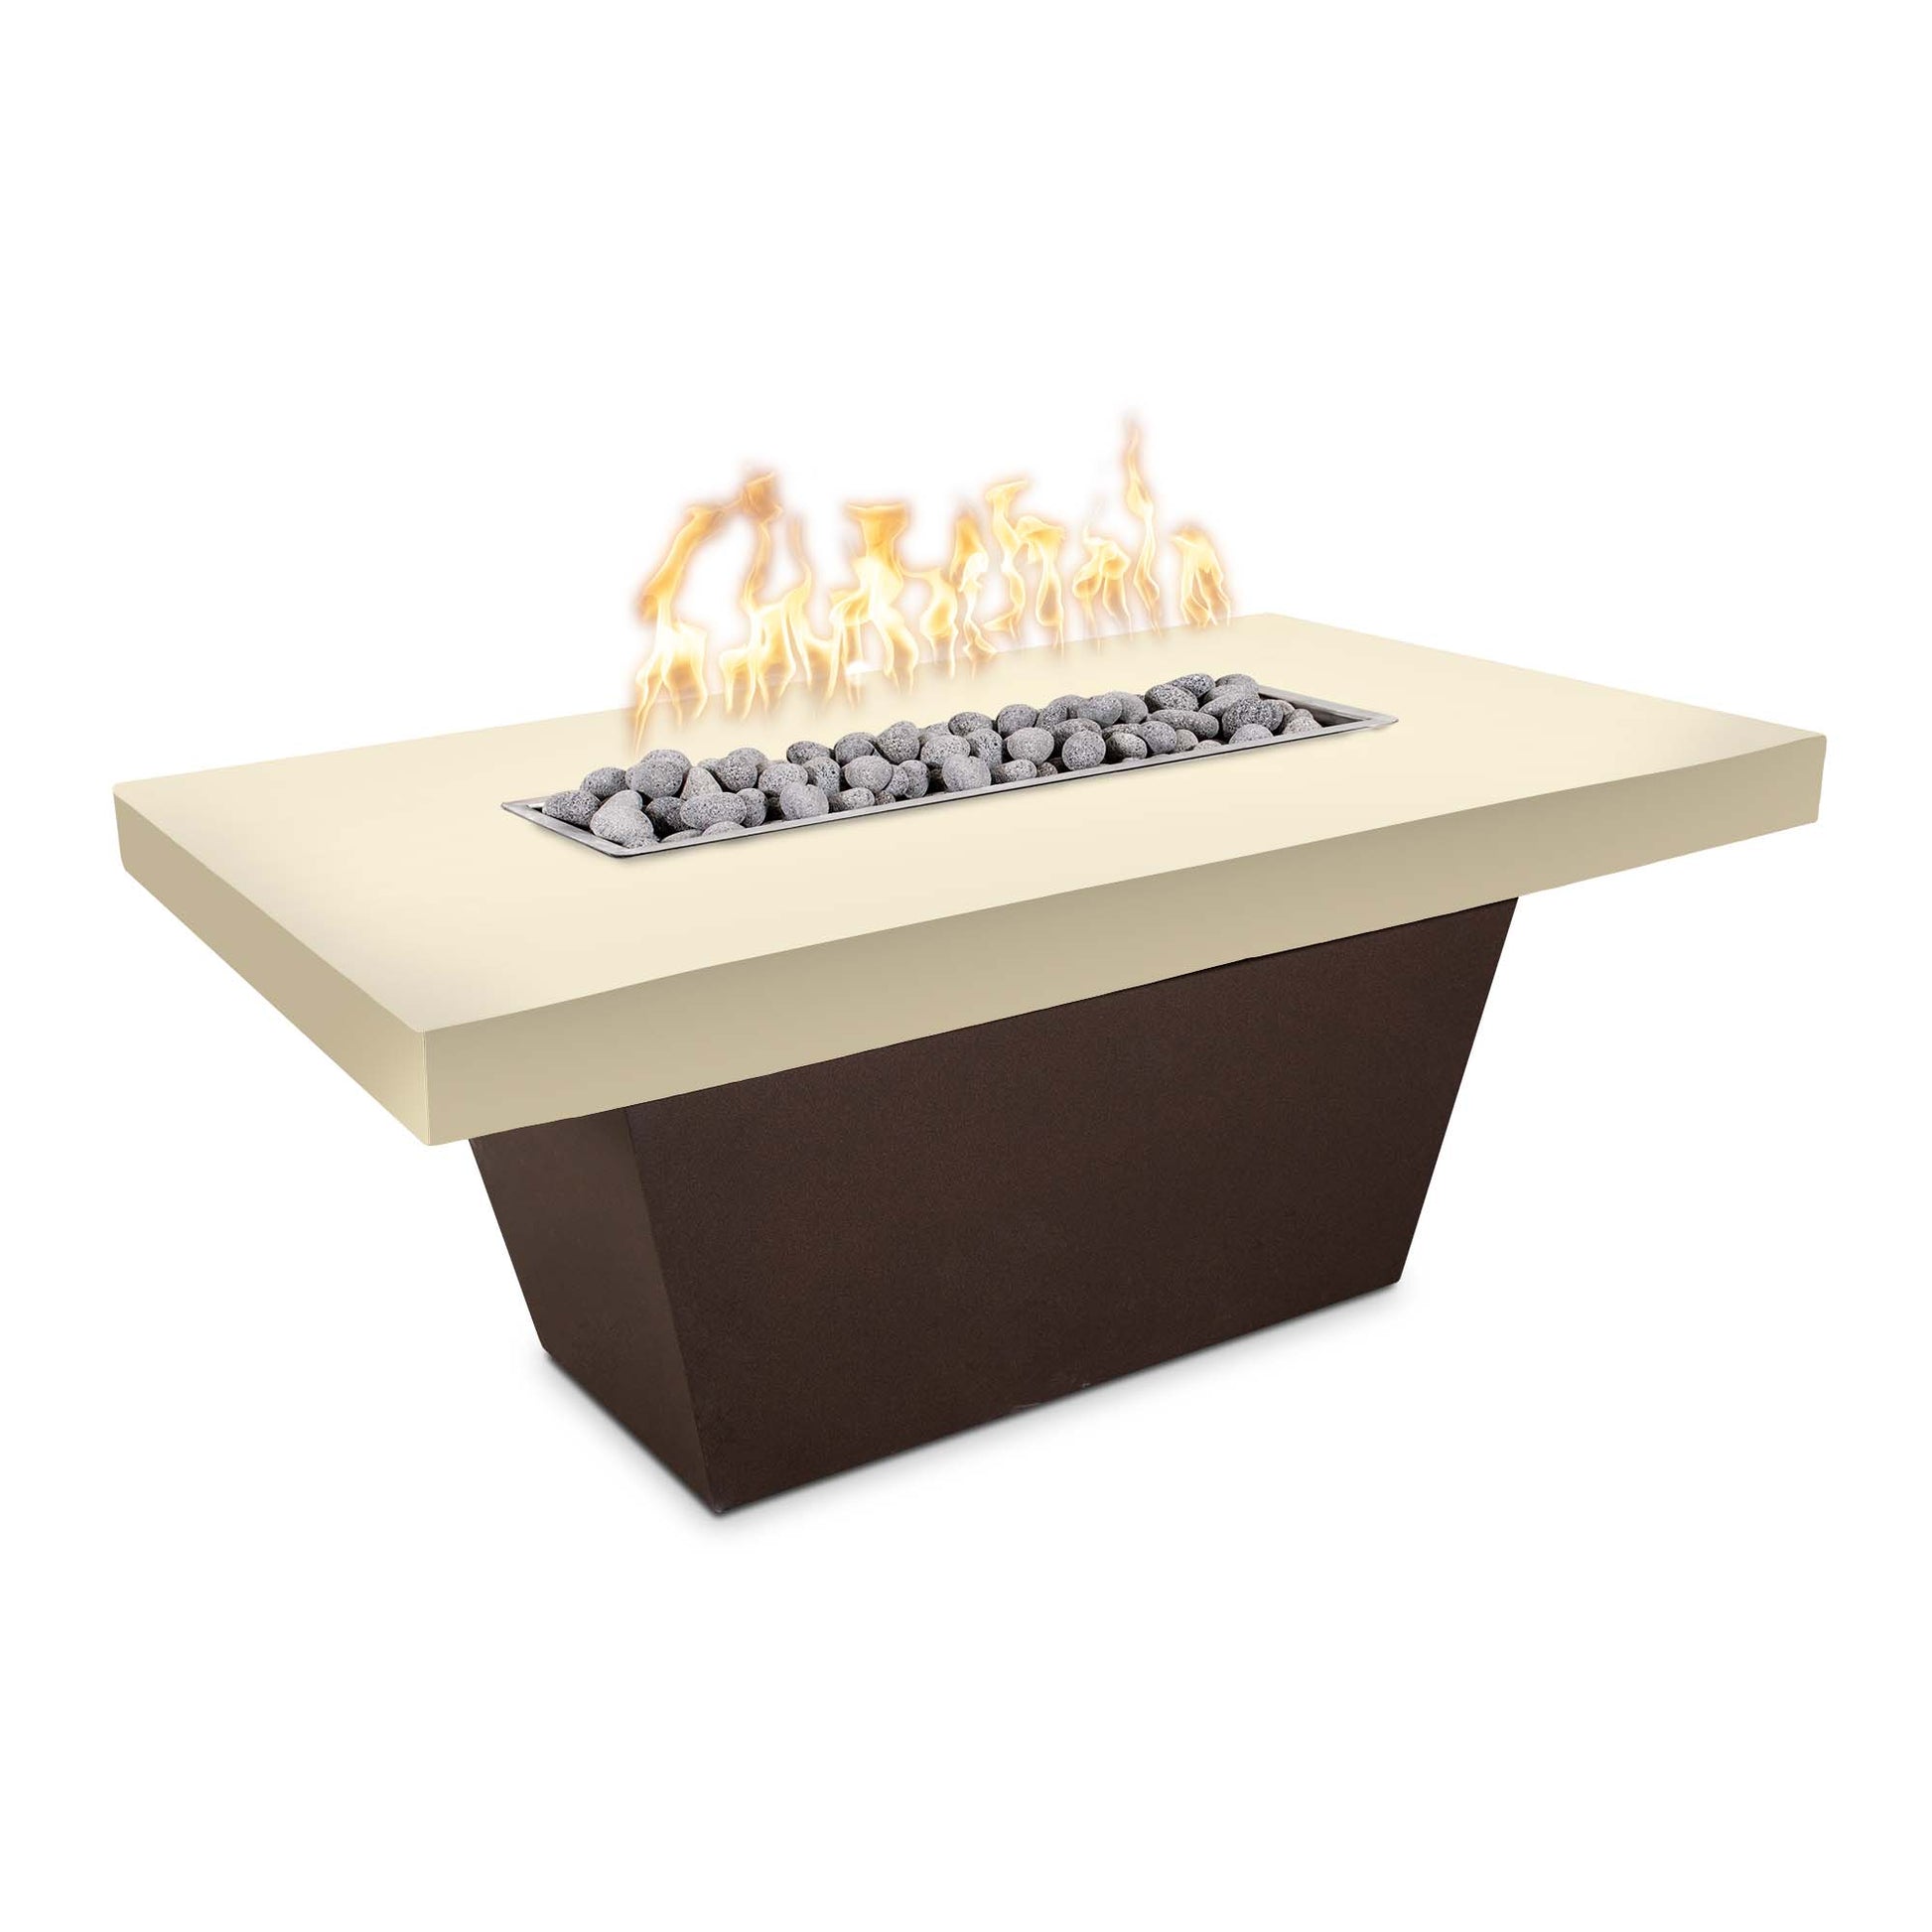 The Outdoor Plus Tacoma 48" White Limestone Concrete Top & Java Powder Coated Base Natural Gas Fire Table with Match Lit Ignition